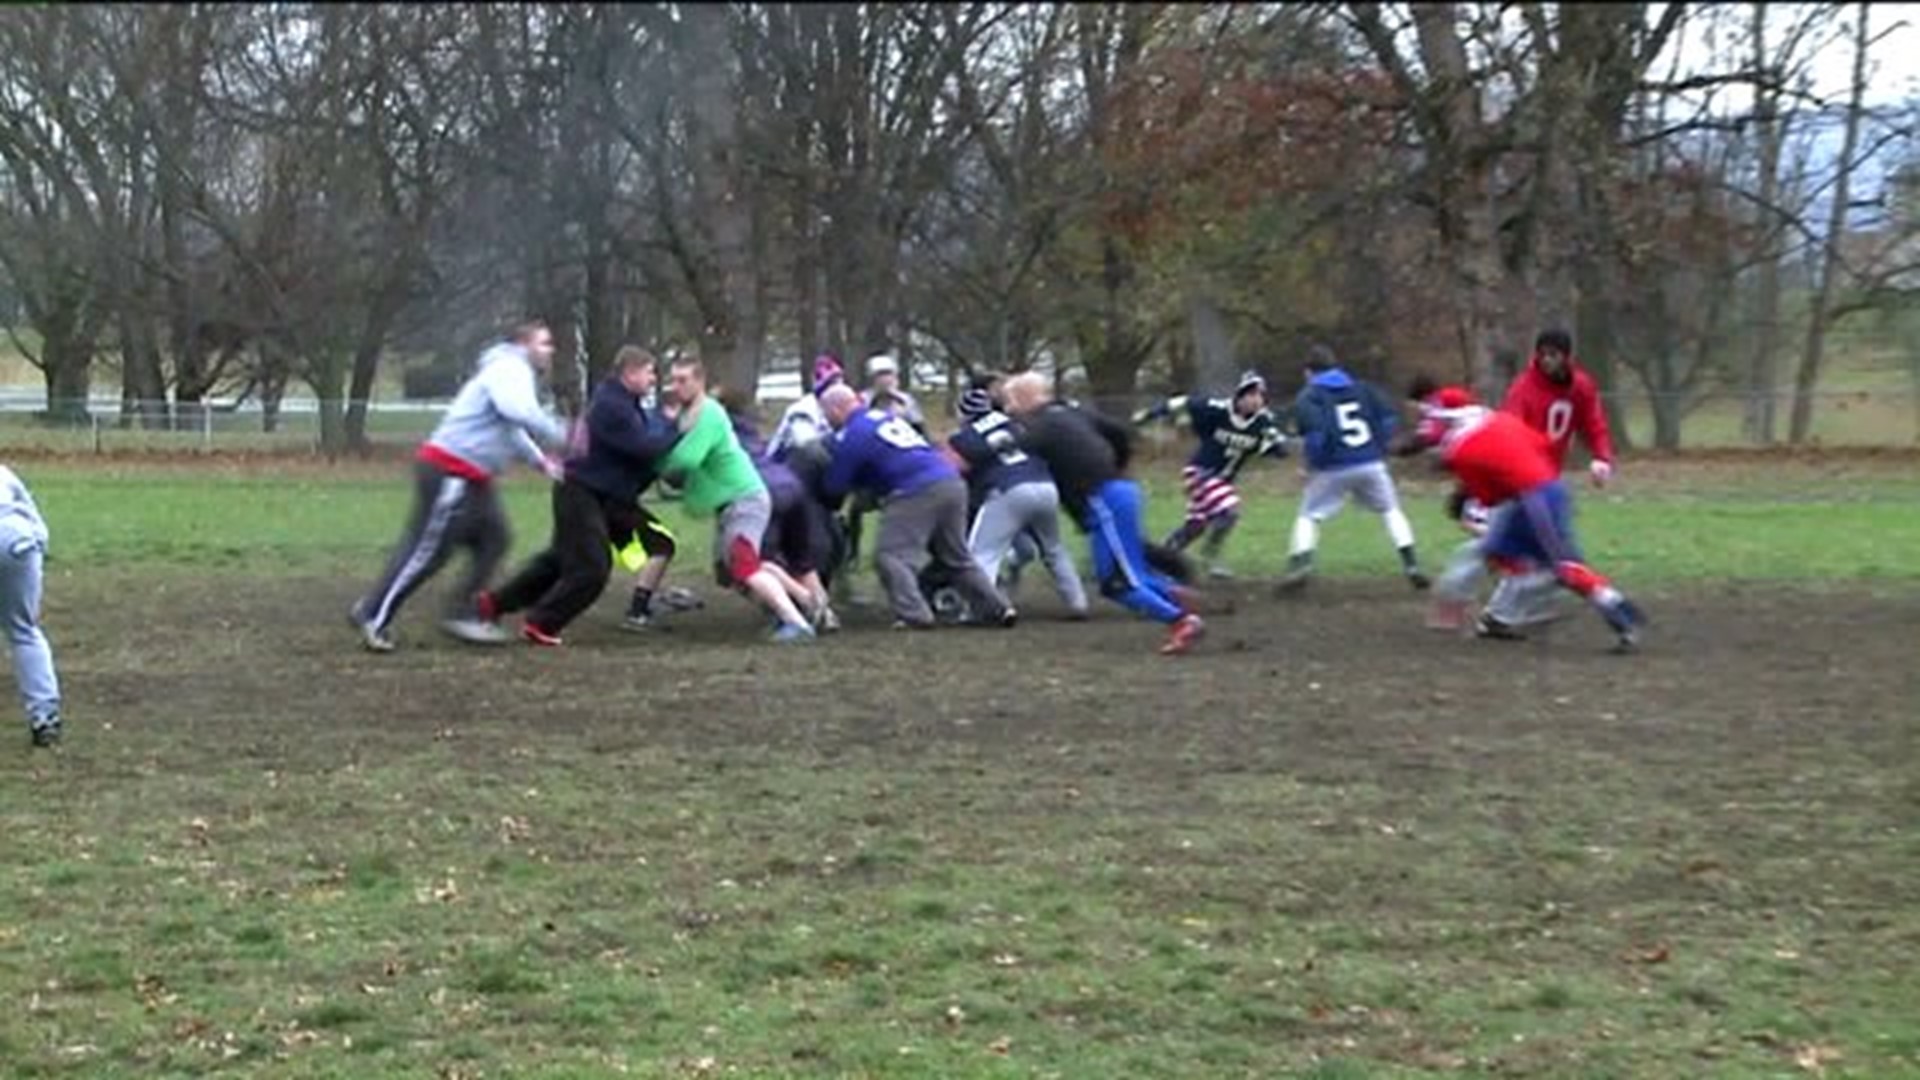 Turkey Bowl Traditions Carry On for the 26th Thanksgiving in Wilkes-Barre